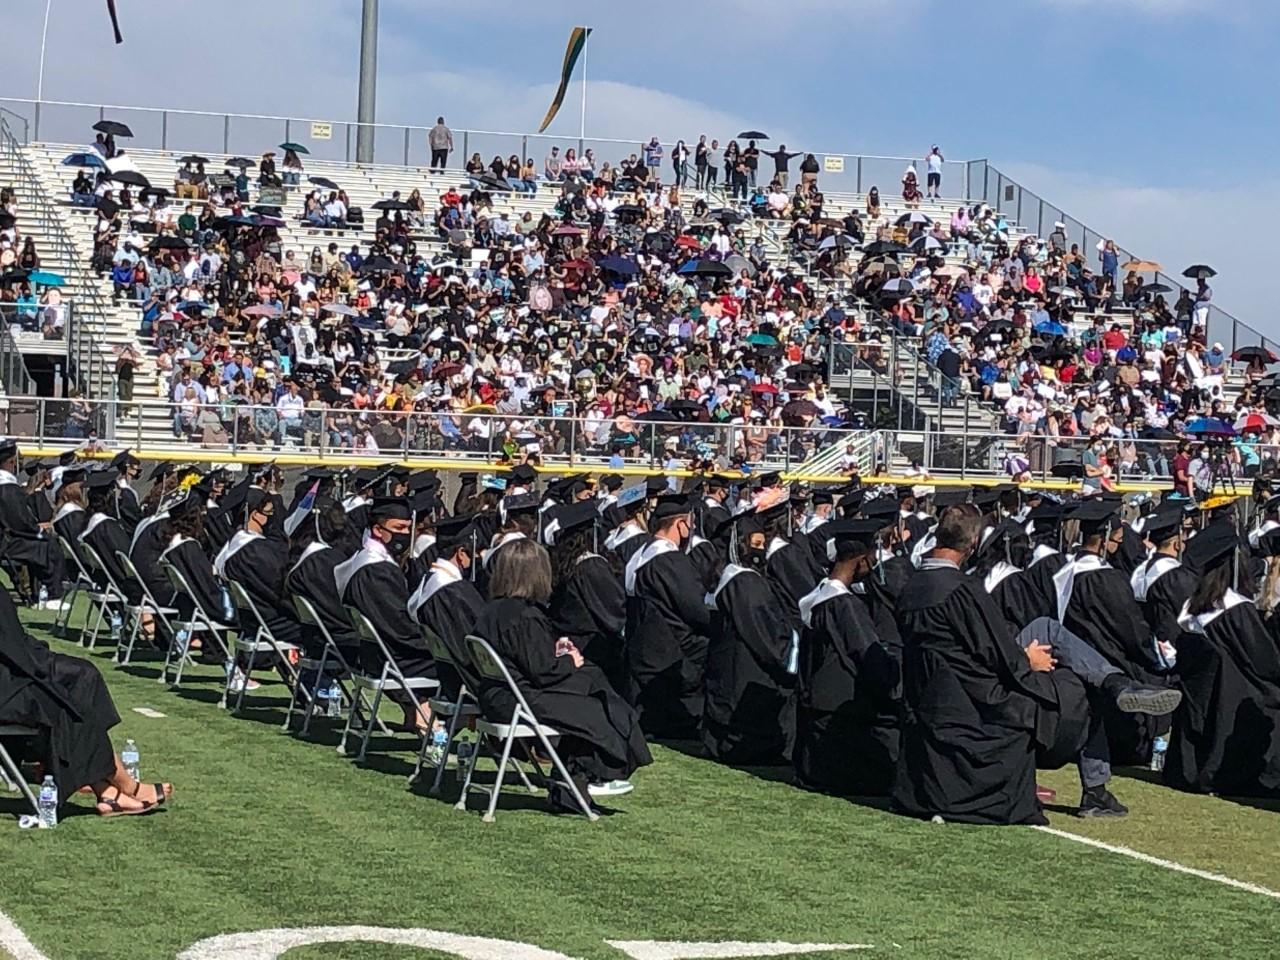 Additional Parking Opened to Alleviate Las Cruces Graduation Congestion